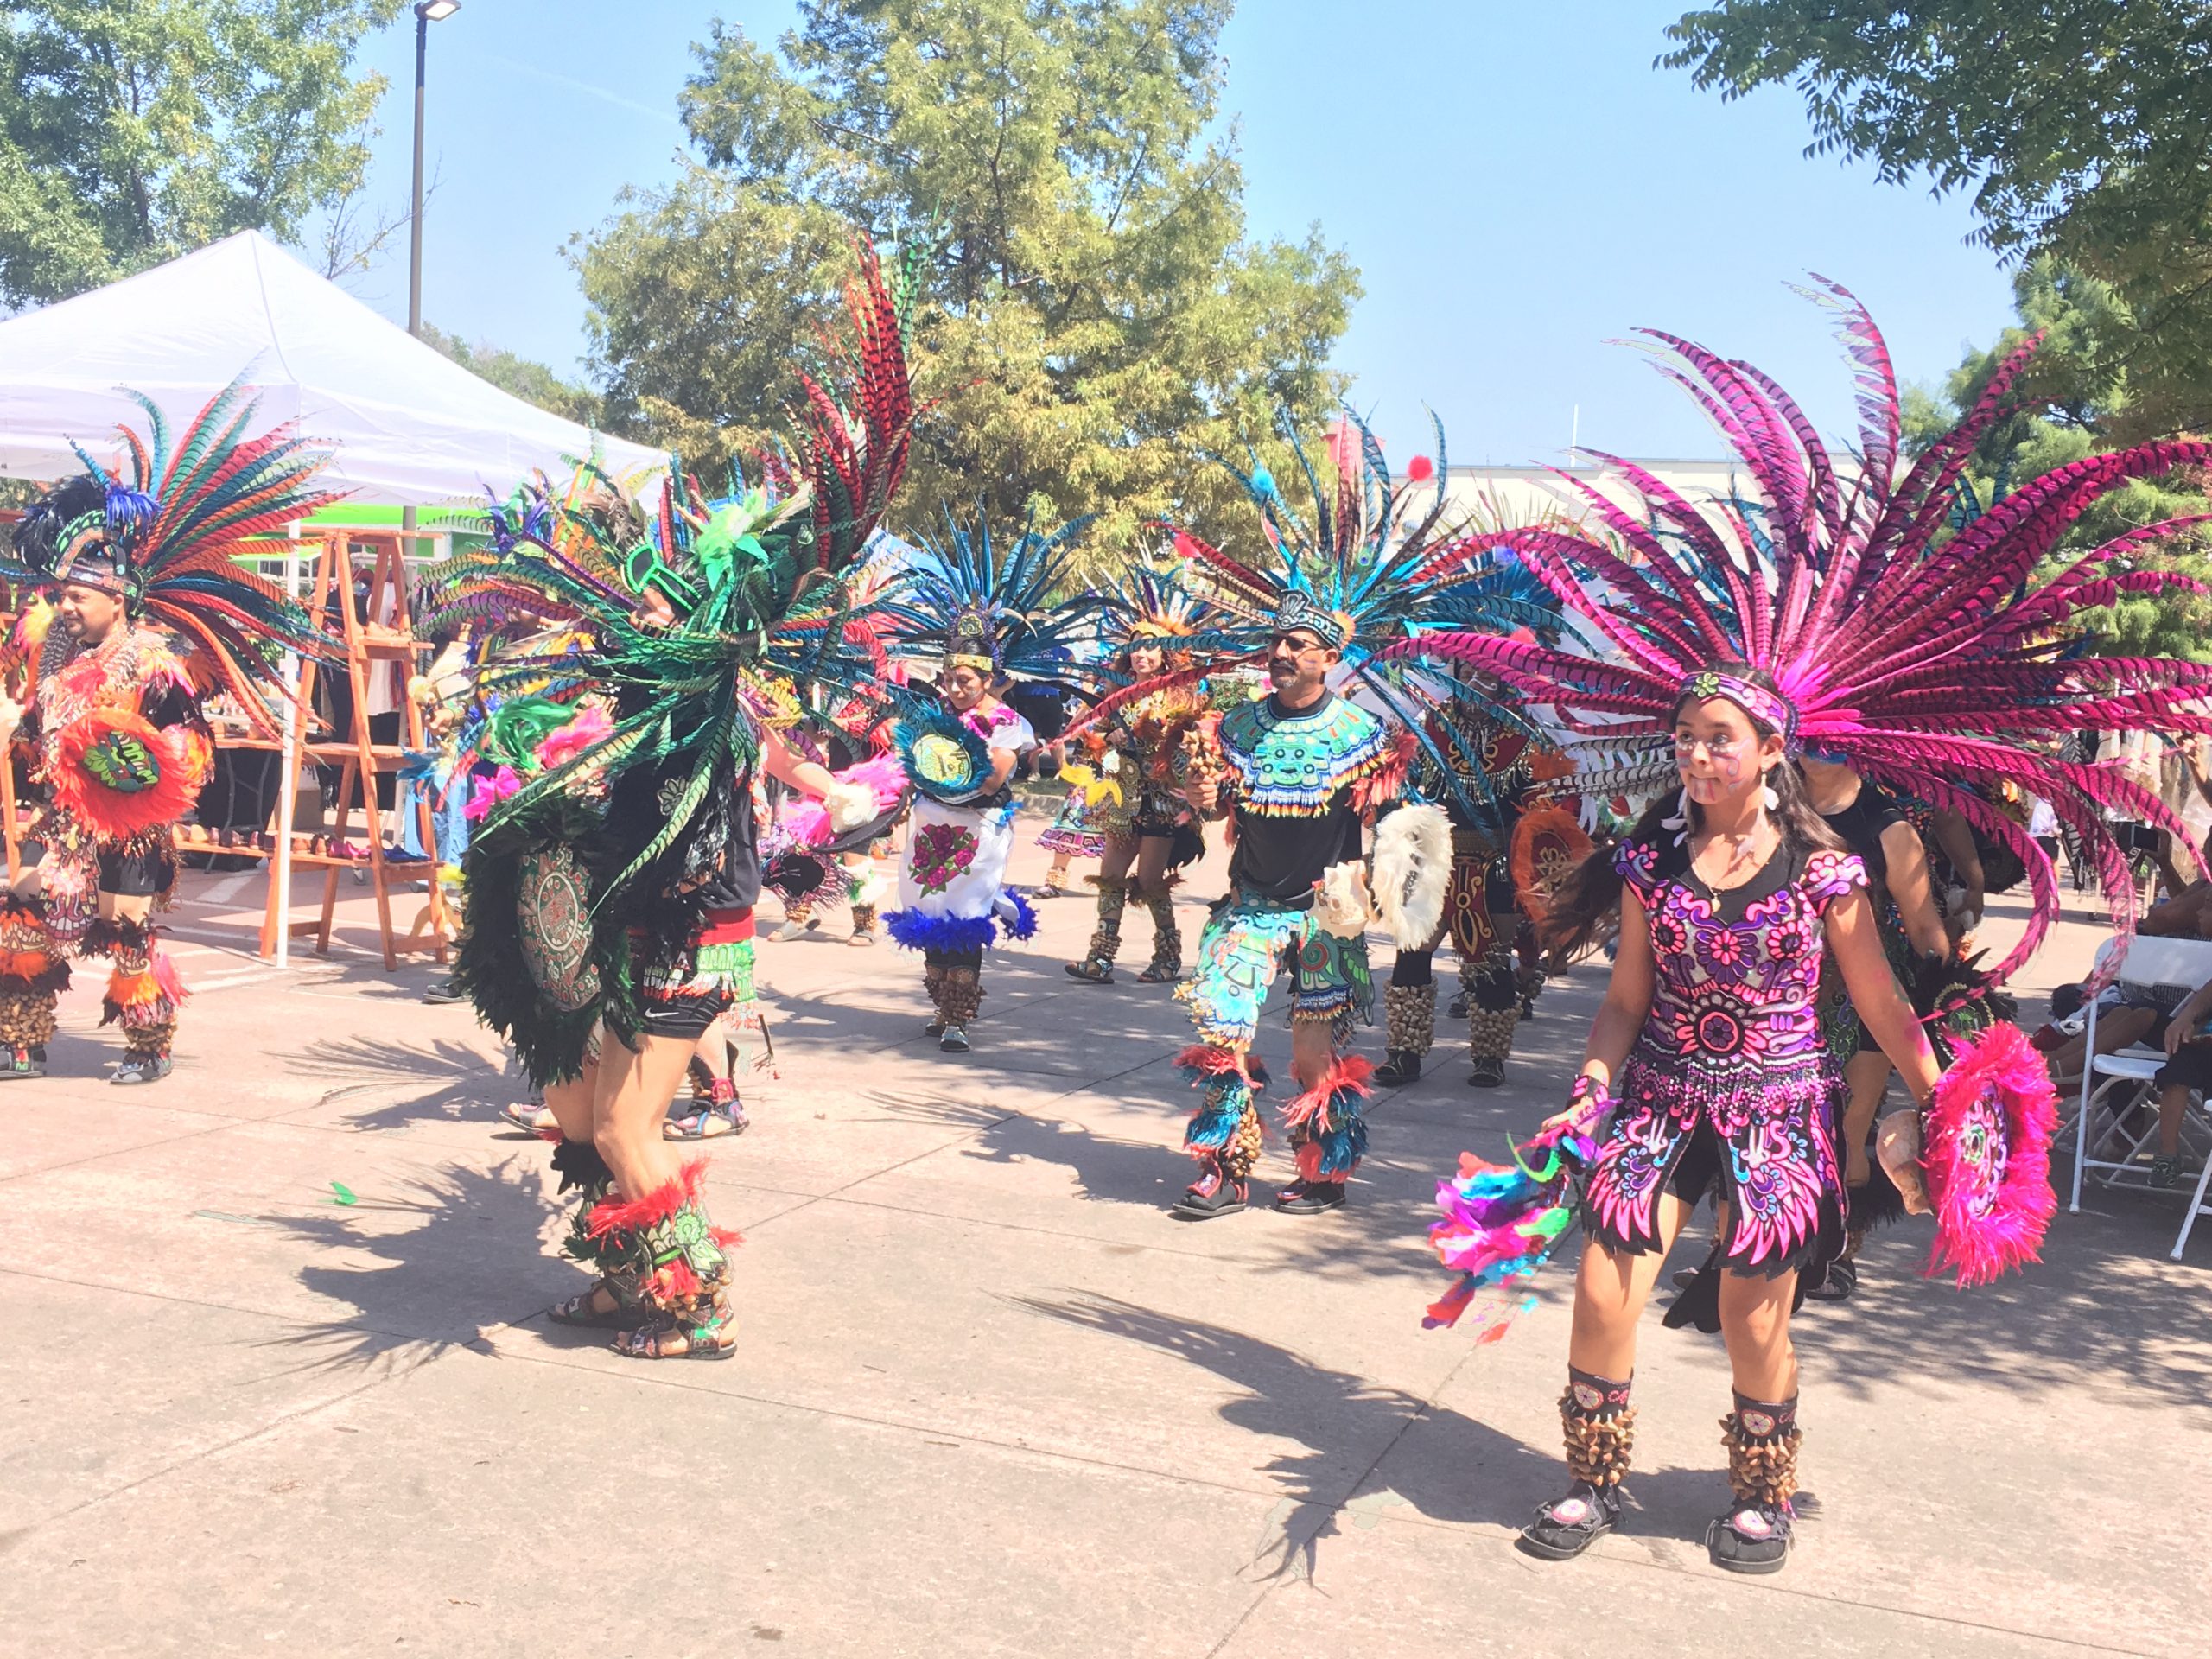 Kendall Whittier honors independence days at upcoming Los Festivales y Mercados